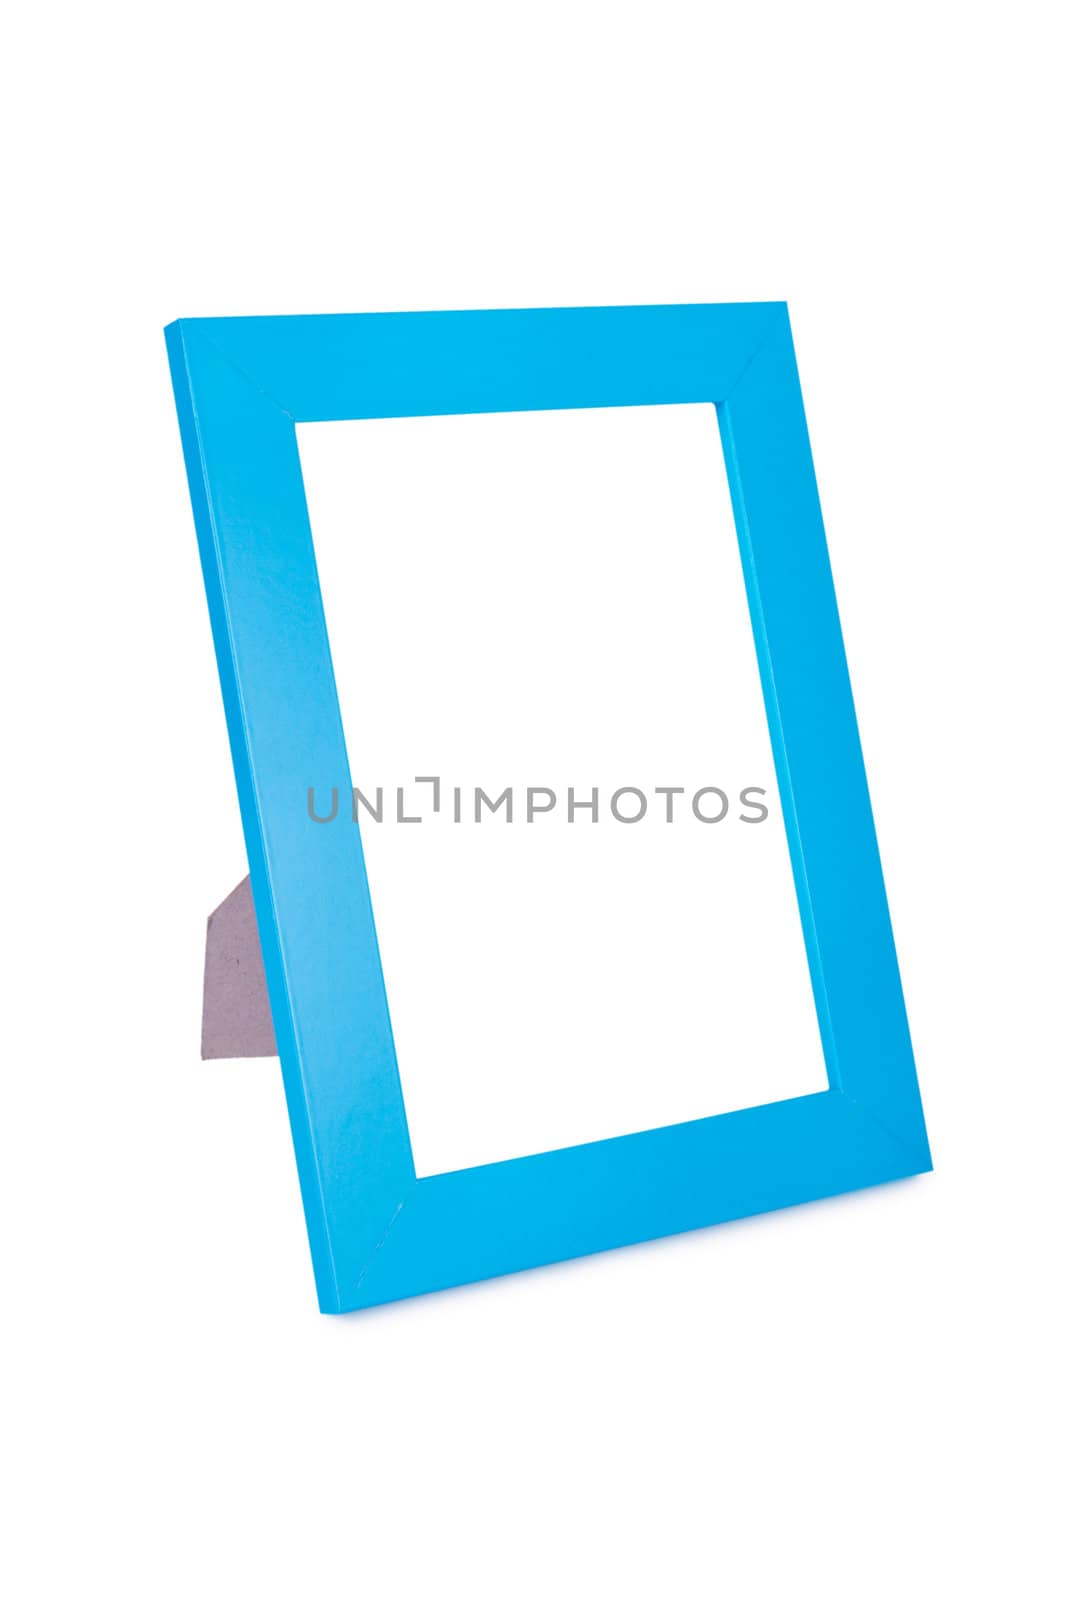 Blue picture frame isolated on white background